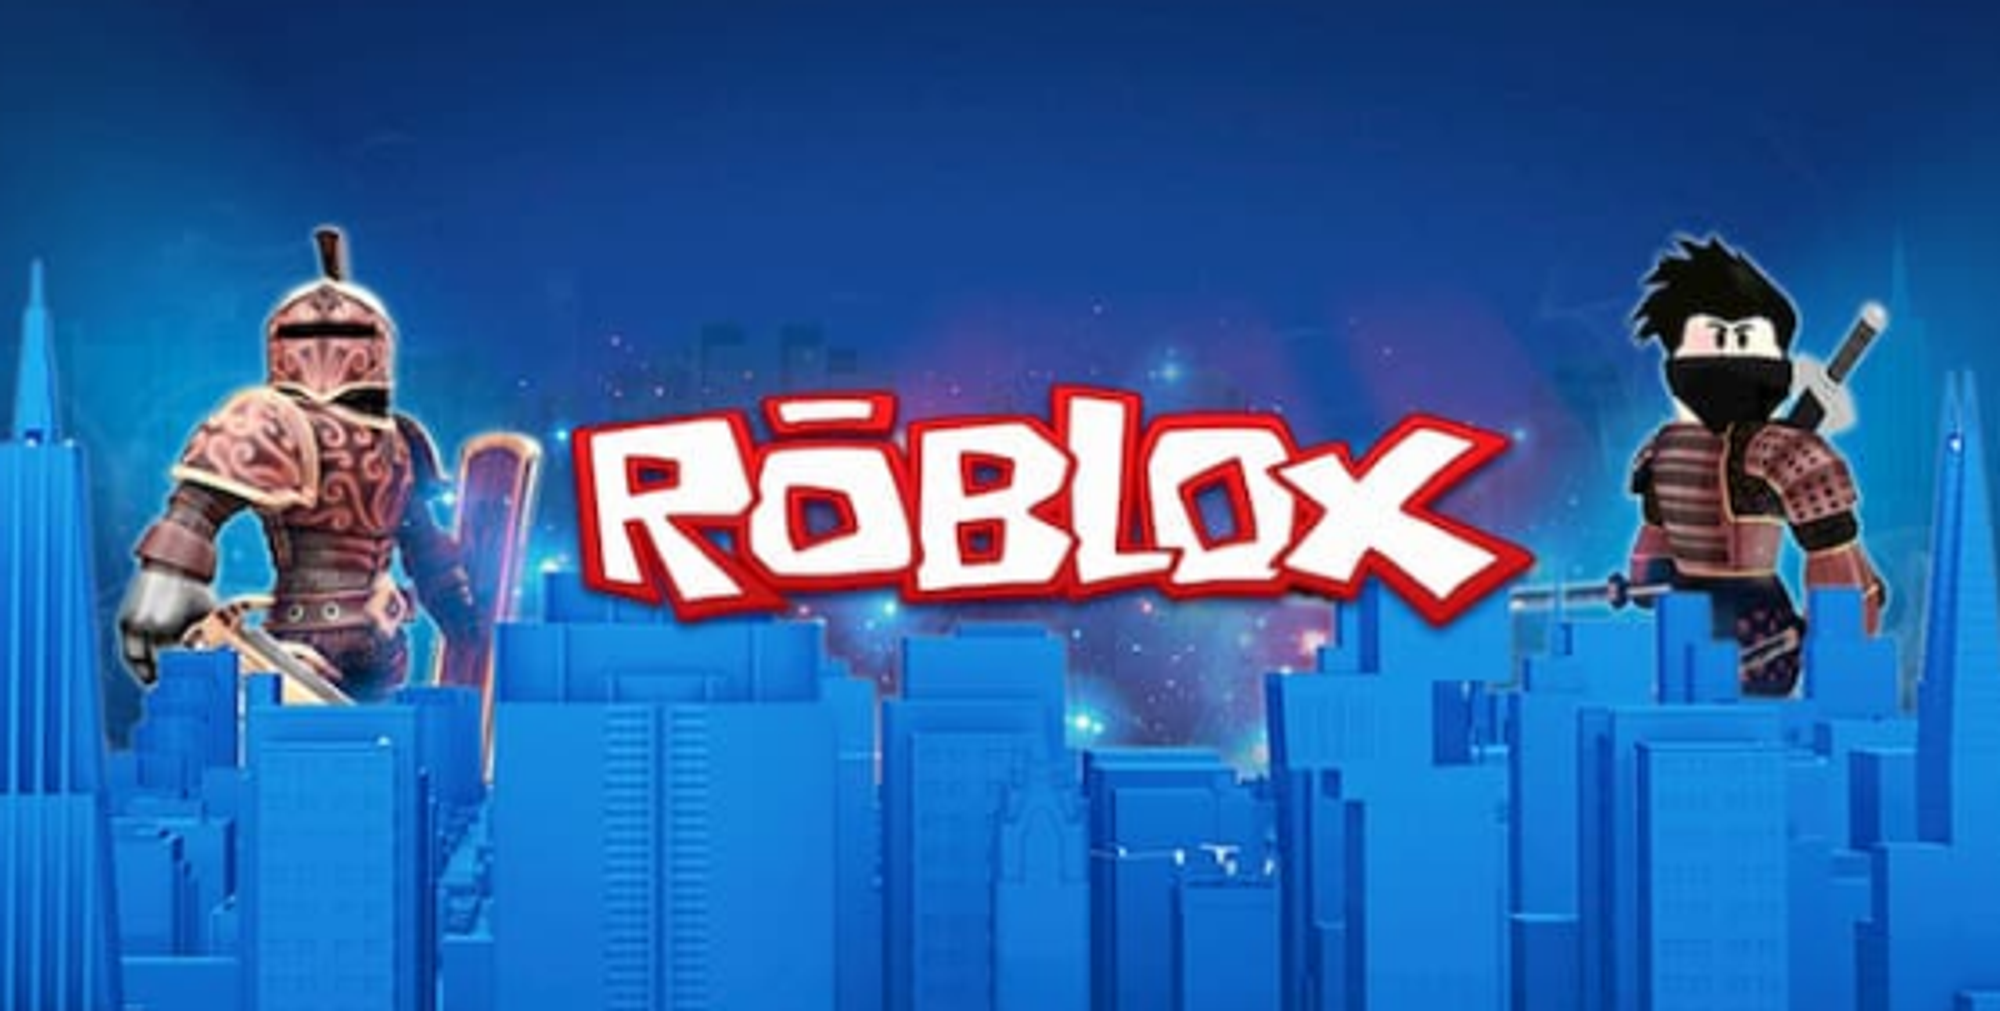 How To Hack Roblox For Robux Unlimited V12 - roblox hack v6 5 dwolad